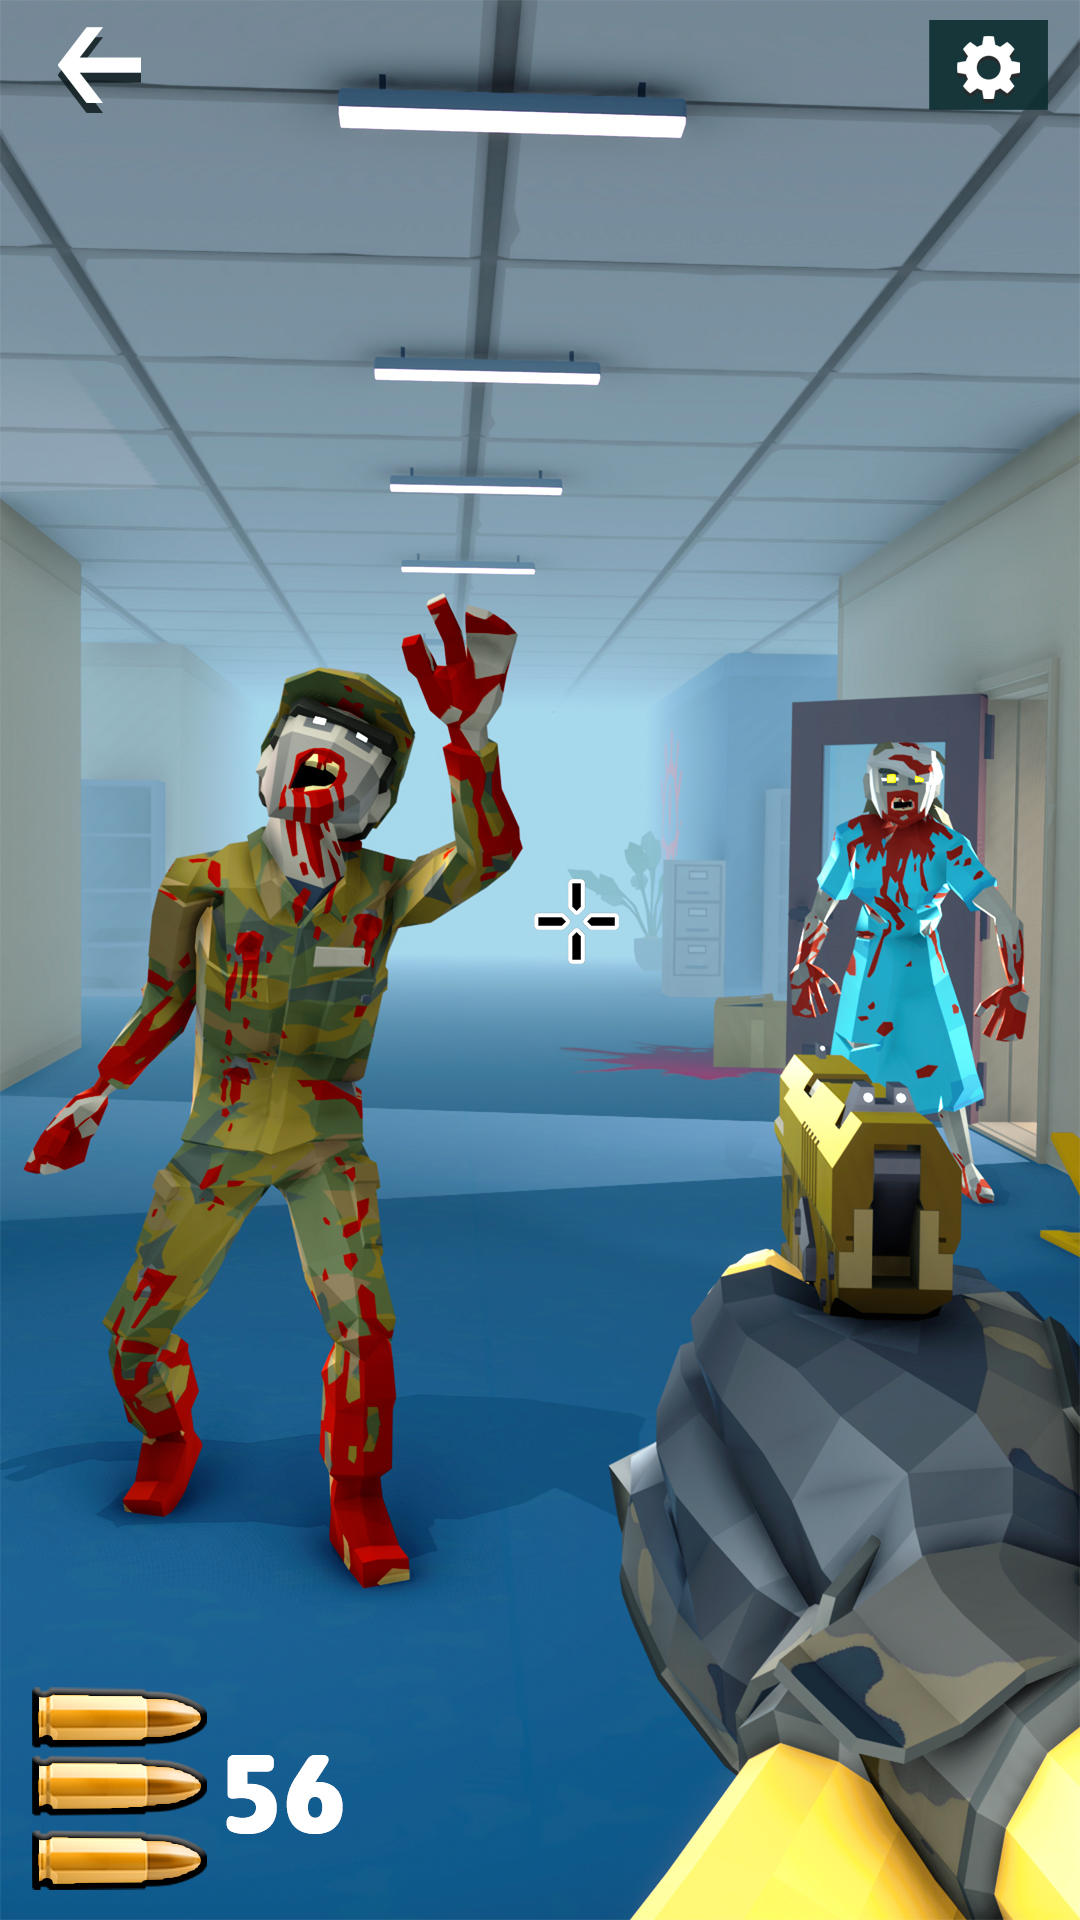 Screenshot 1 of Zombie Shooter Dead Army Games 1.0.0